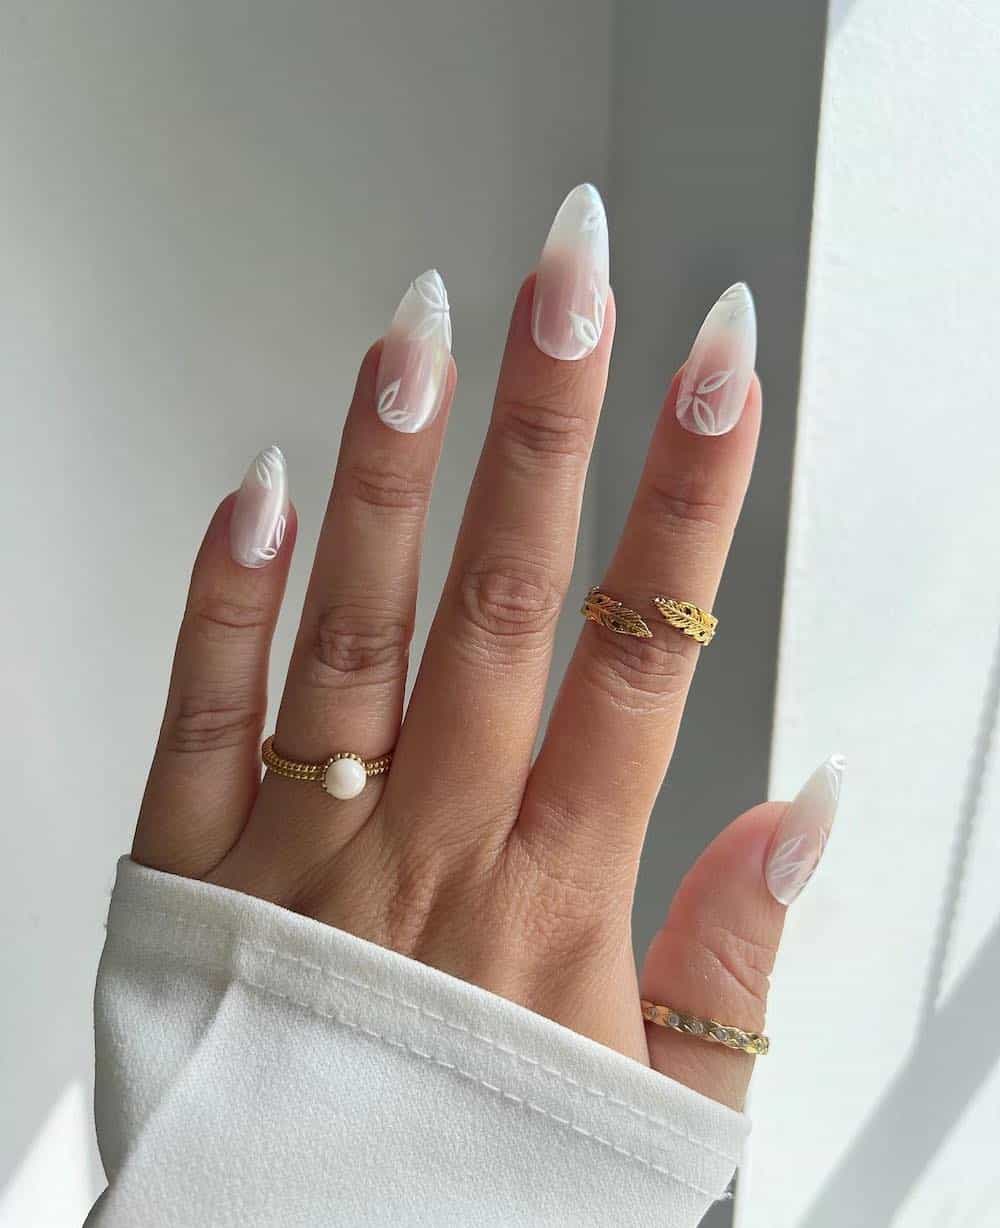 A hand with long stiletto nails featuring the glazed donut manicure with white flower accents